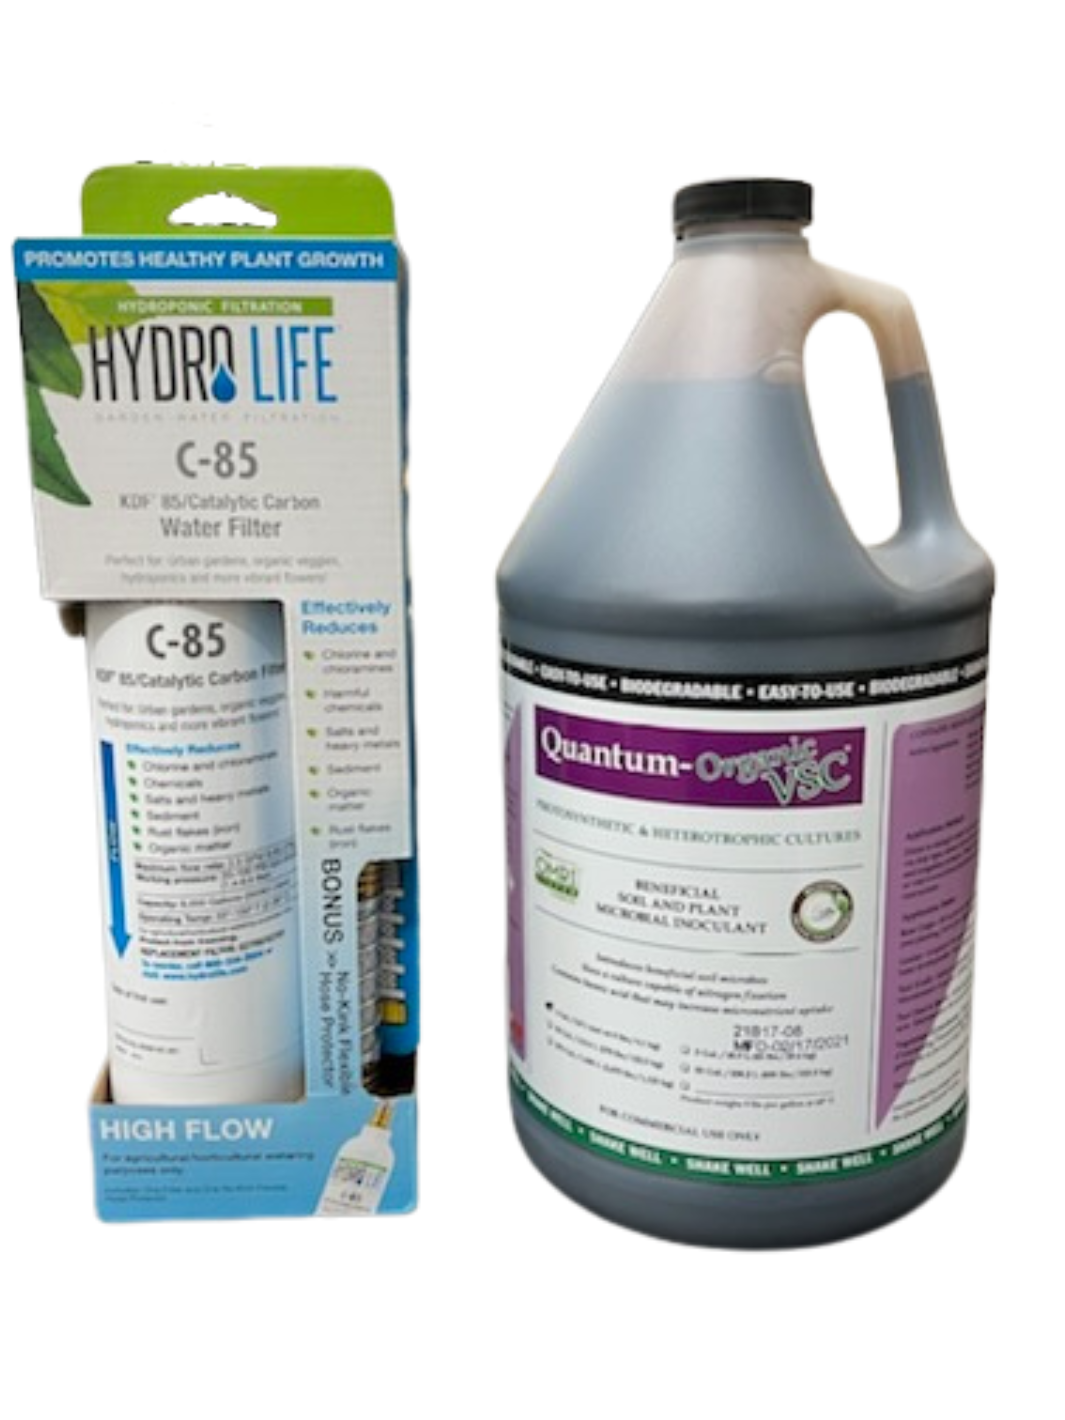 Quantum Growth Organic VSC With Hydro Life C-85 Inline Water Filter